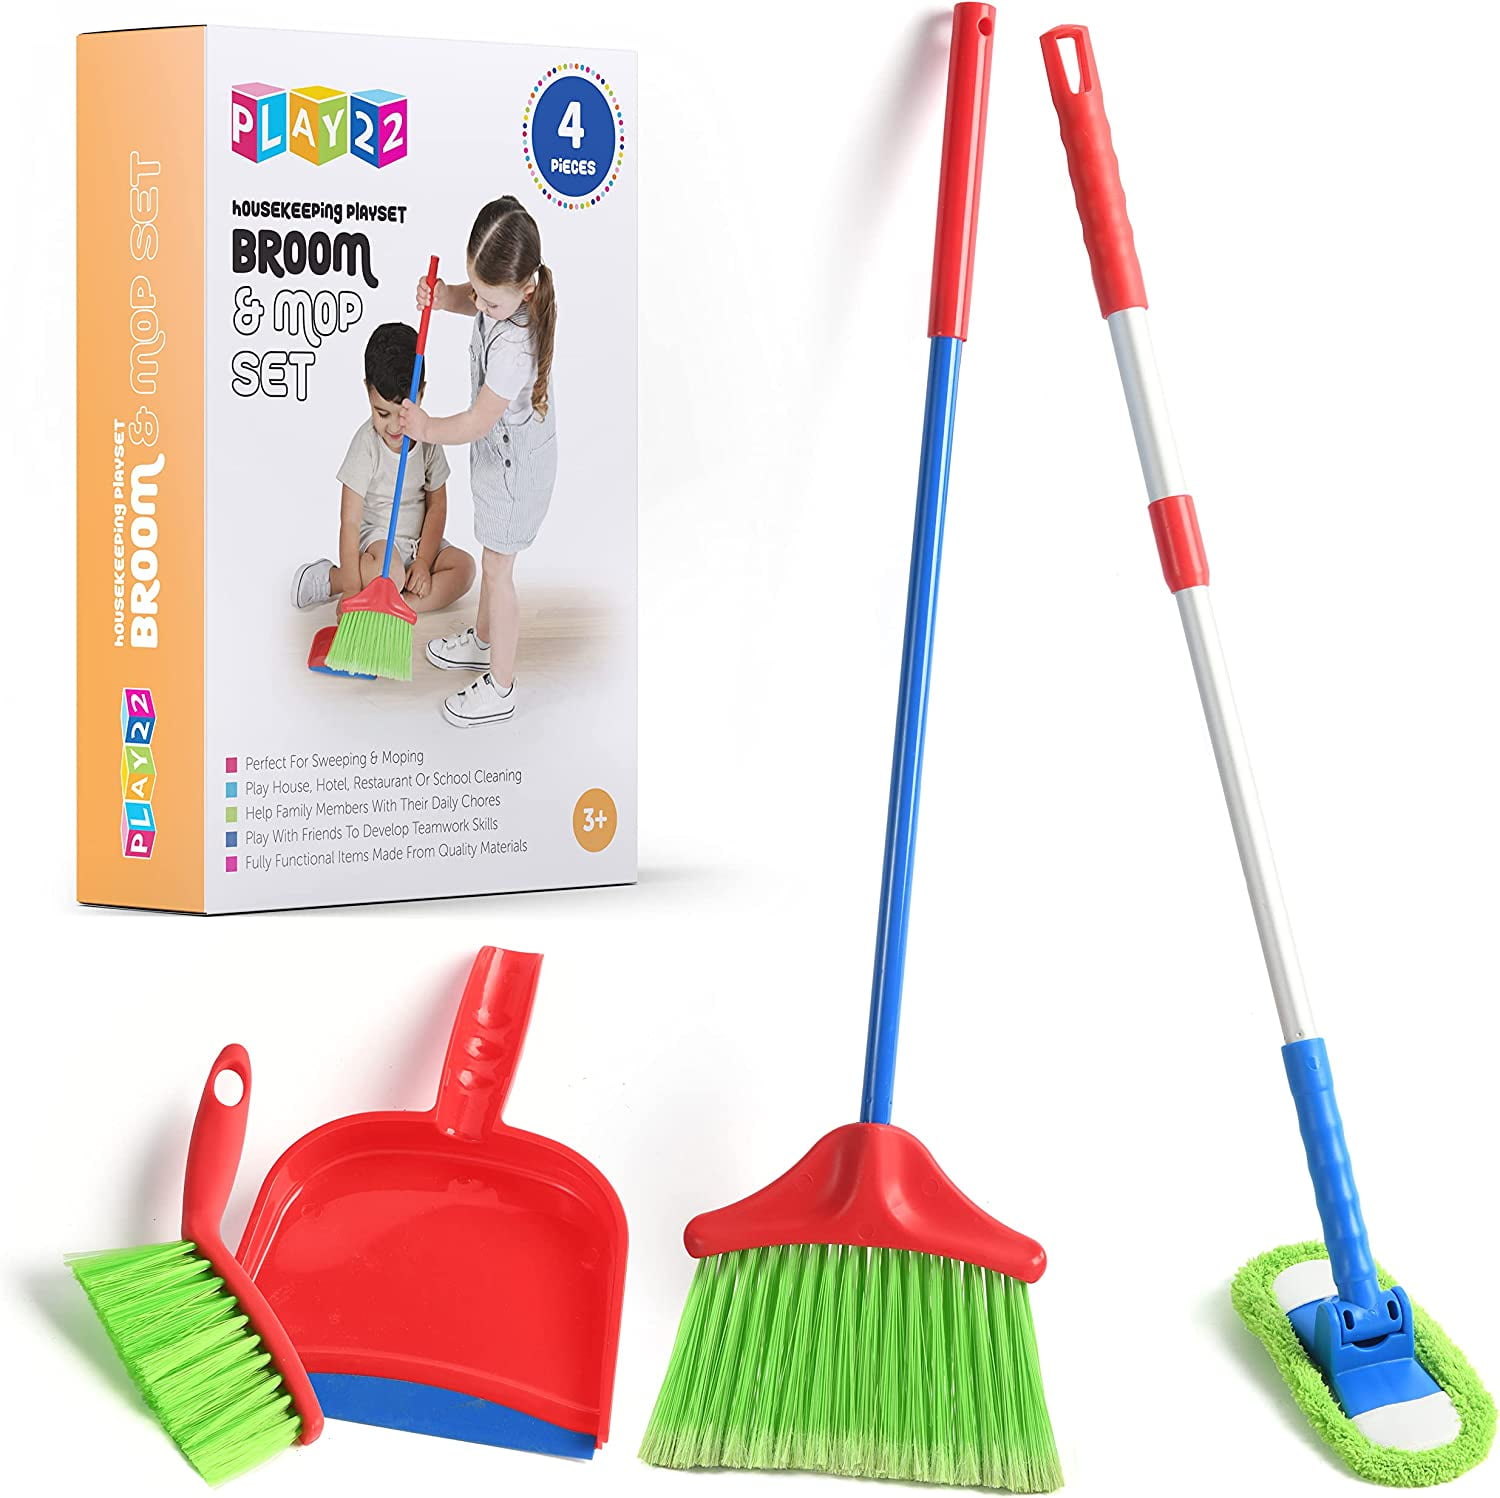 JustForKids Wooden Detachable Kids Cleaning Set - Duster, Brush, Mop, Broom  and Hanging Stand Play - Housekeeping Kit - STEM Toys for Toddlers Girls 